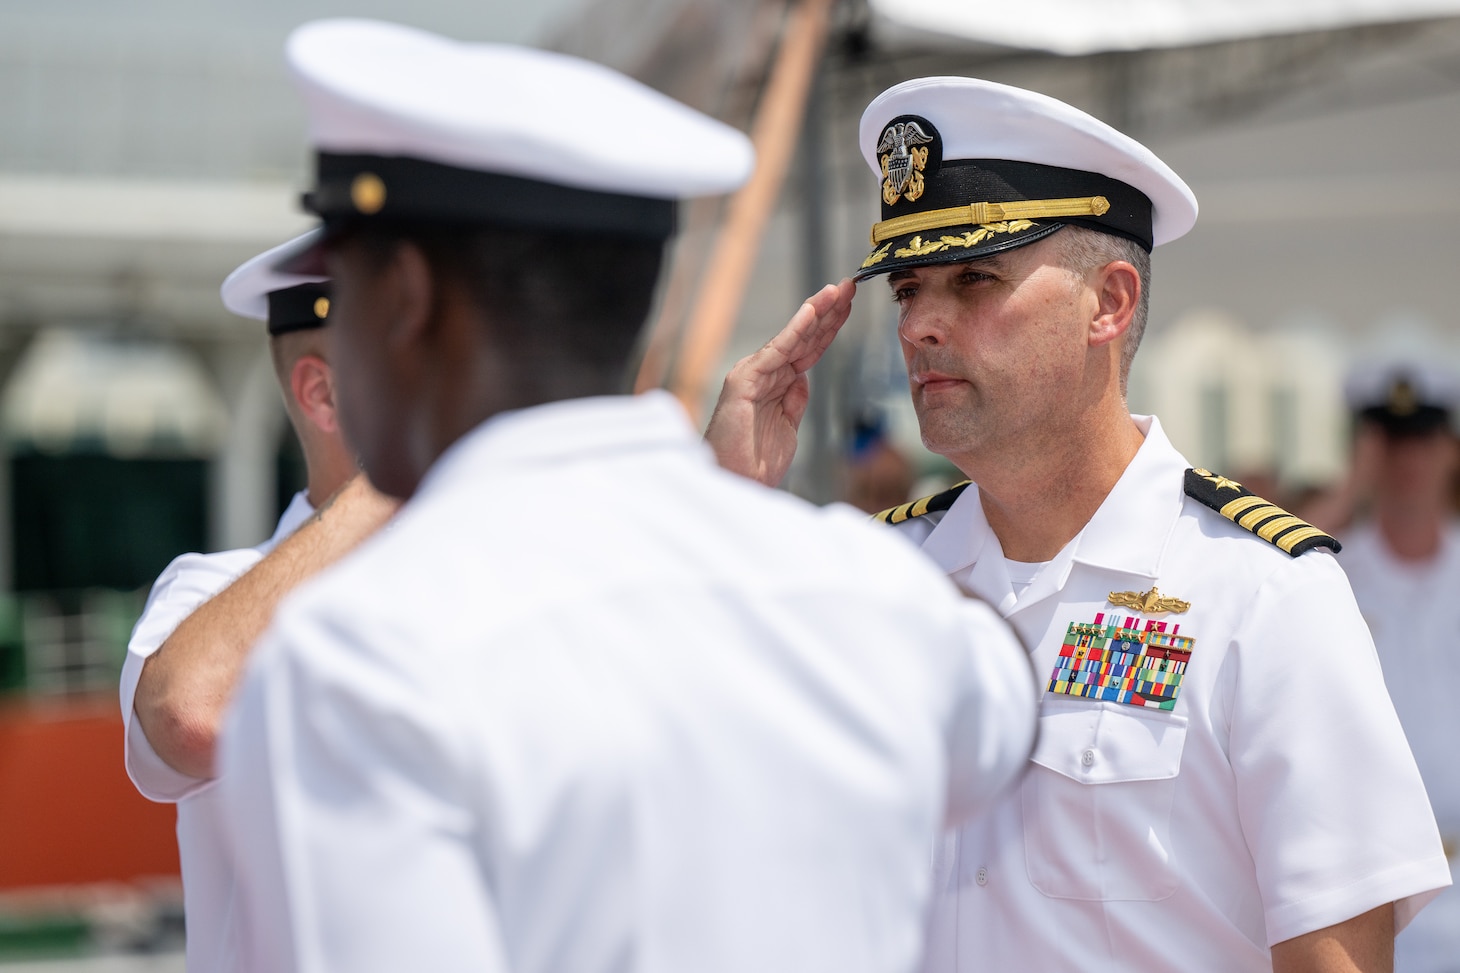 Capt. Tim LaBenz, commodore, Destroyer Squadron (DESRON) 7, departs after assuming command of DESRON 7 during the change of command ceremony aboard the Independence-variant littoral combat ship USS Charleston (LCS 18) in Singapore, Sept. 2, 2022. Charleston, part of DESRON 7, is on a rotational deployment, operating in the U.S. 7th Fleet area of operations to enhance interoperability with partners and serve as a ready-response force in support of a free and open Indo-Pacific region. As the U.S. Navy’s destroyer squadron forward-deployed in Southeast Asia, DESRON 7 serves as the primary tactical and operational commander of littoral combat ships rotationally deployed to Singapore, Expeditionary Strike Group (ESG) 7’s Sea Combat Commander, and builds partnerships through training exercises and military-to-military engagements.